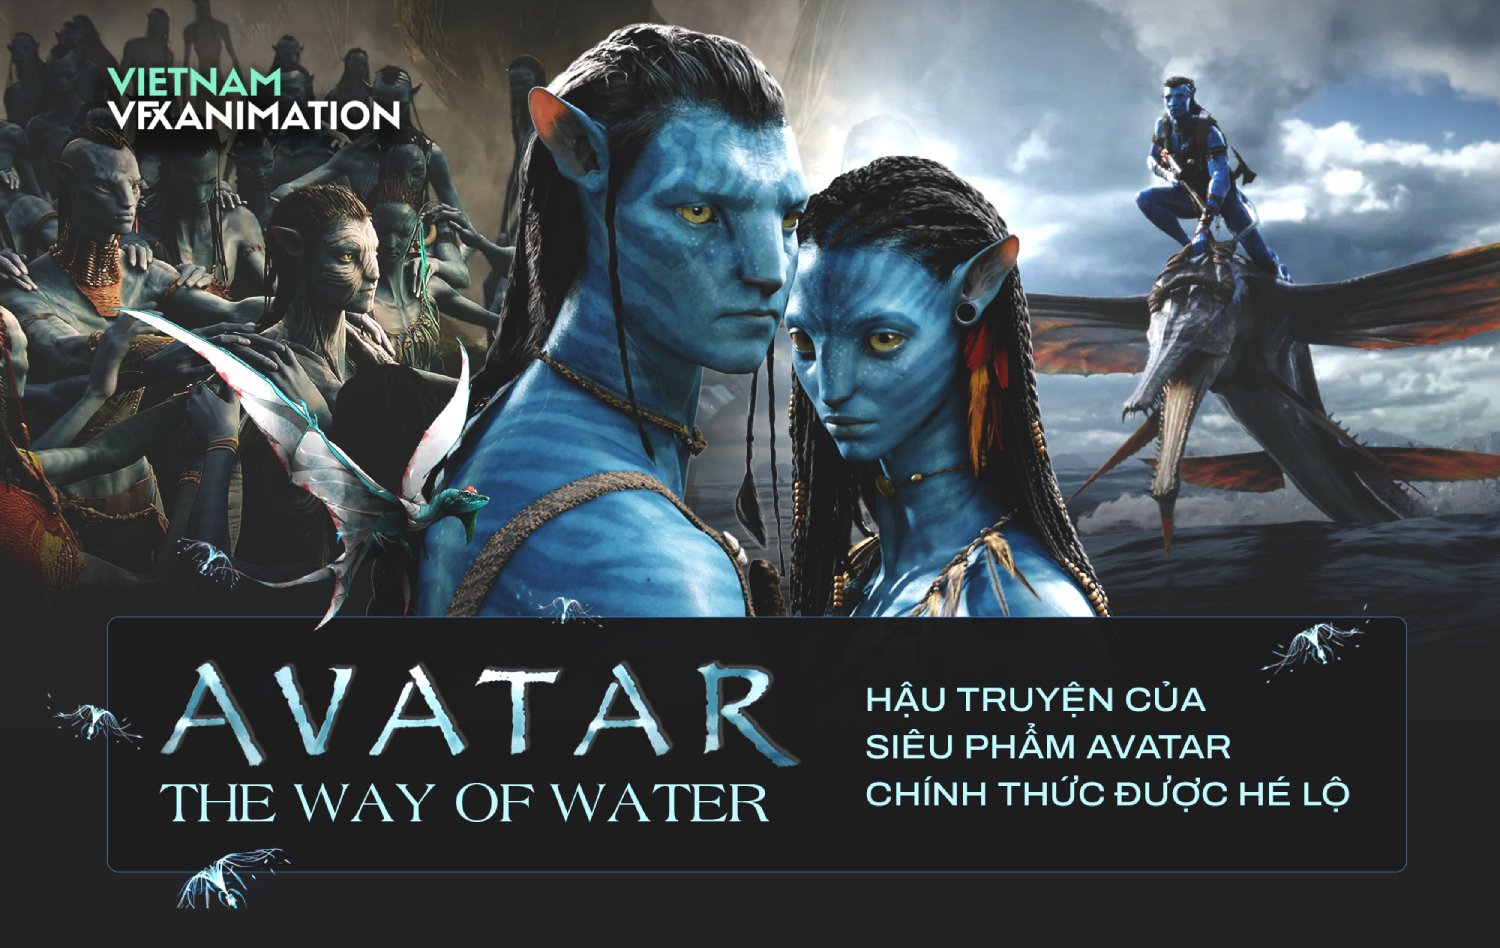 Avatar 2 The Way of Water  Film Cast Release Date Avatar 2 The Way of  Water Full Movie Download Online MP3 Songs HD Trailer  Bollywood Life